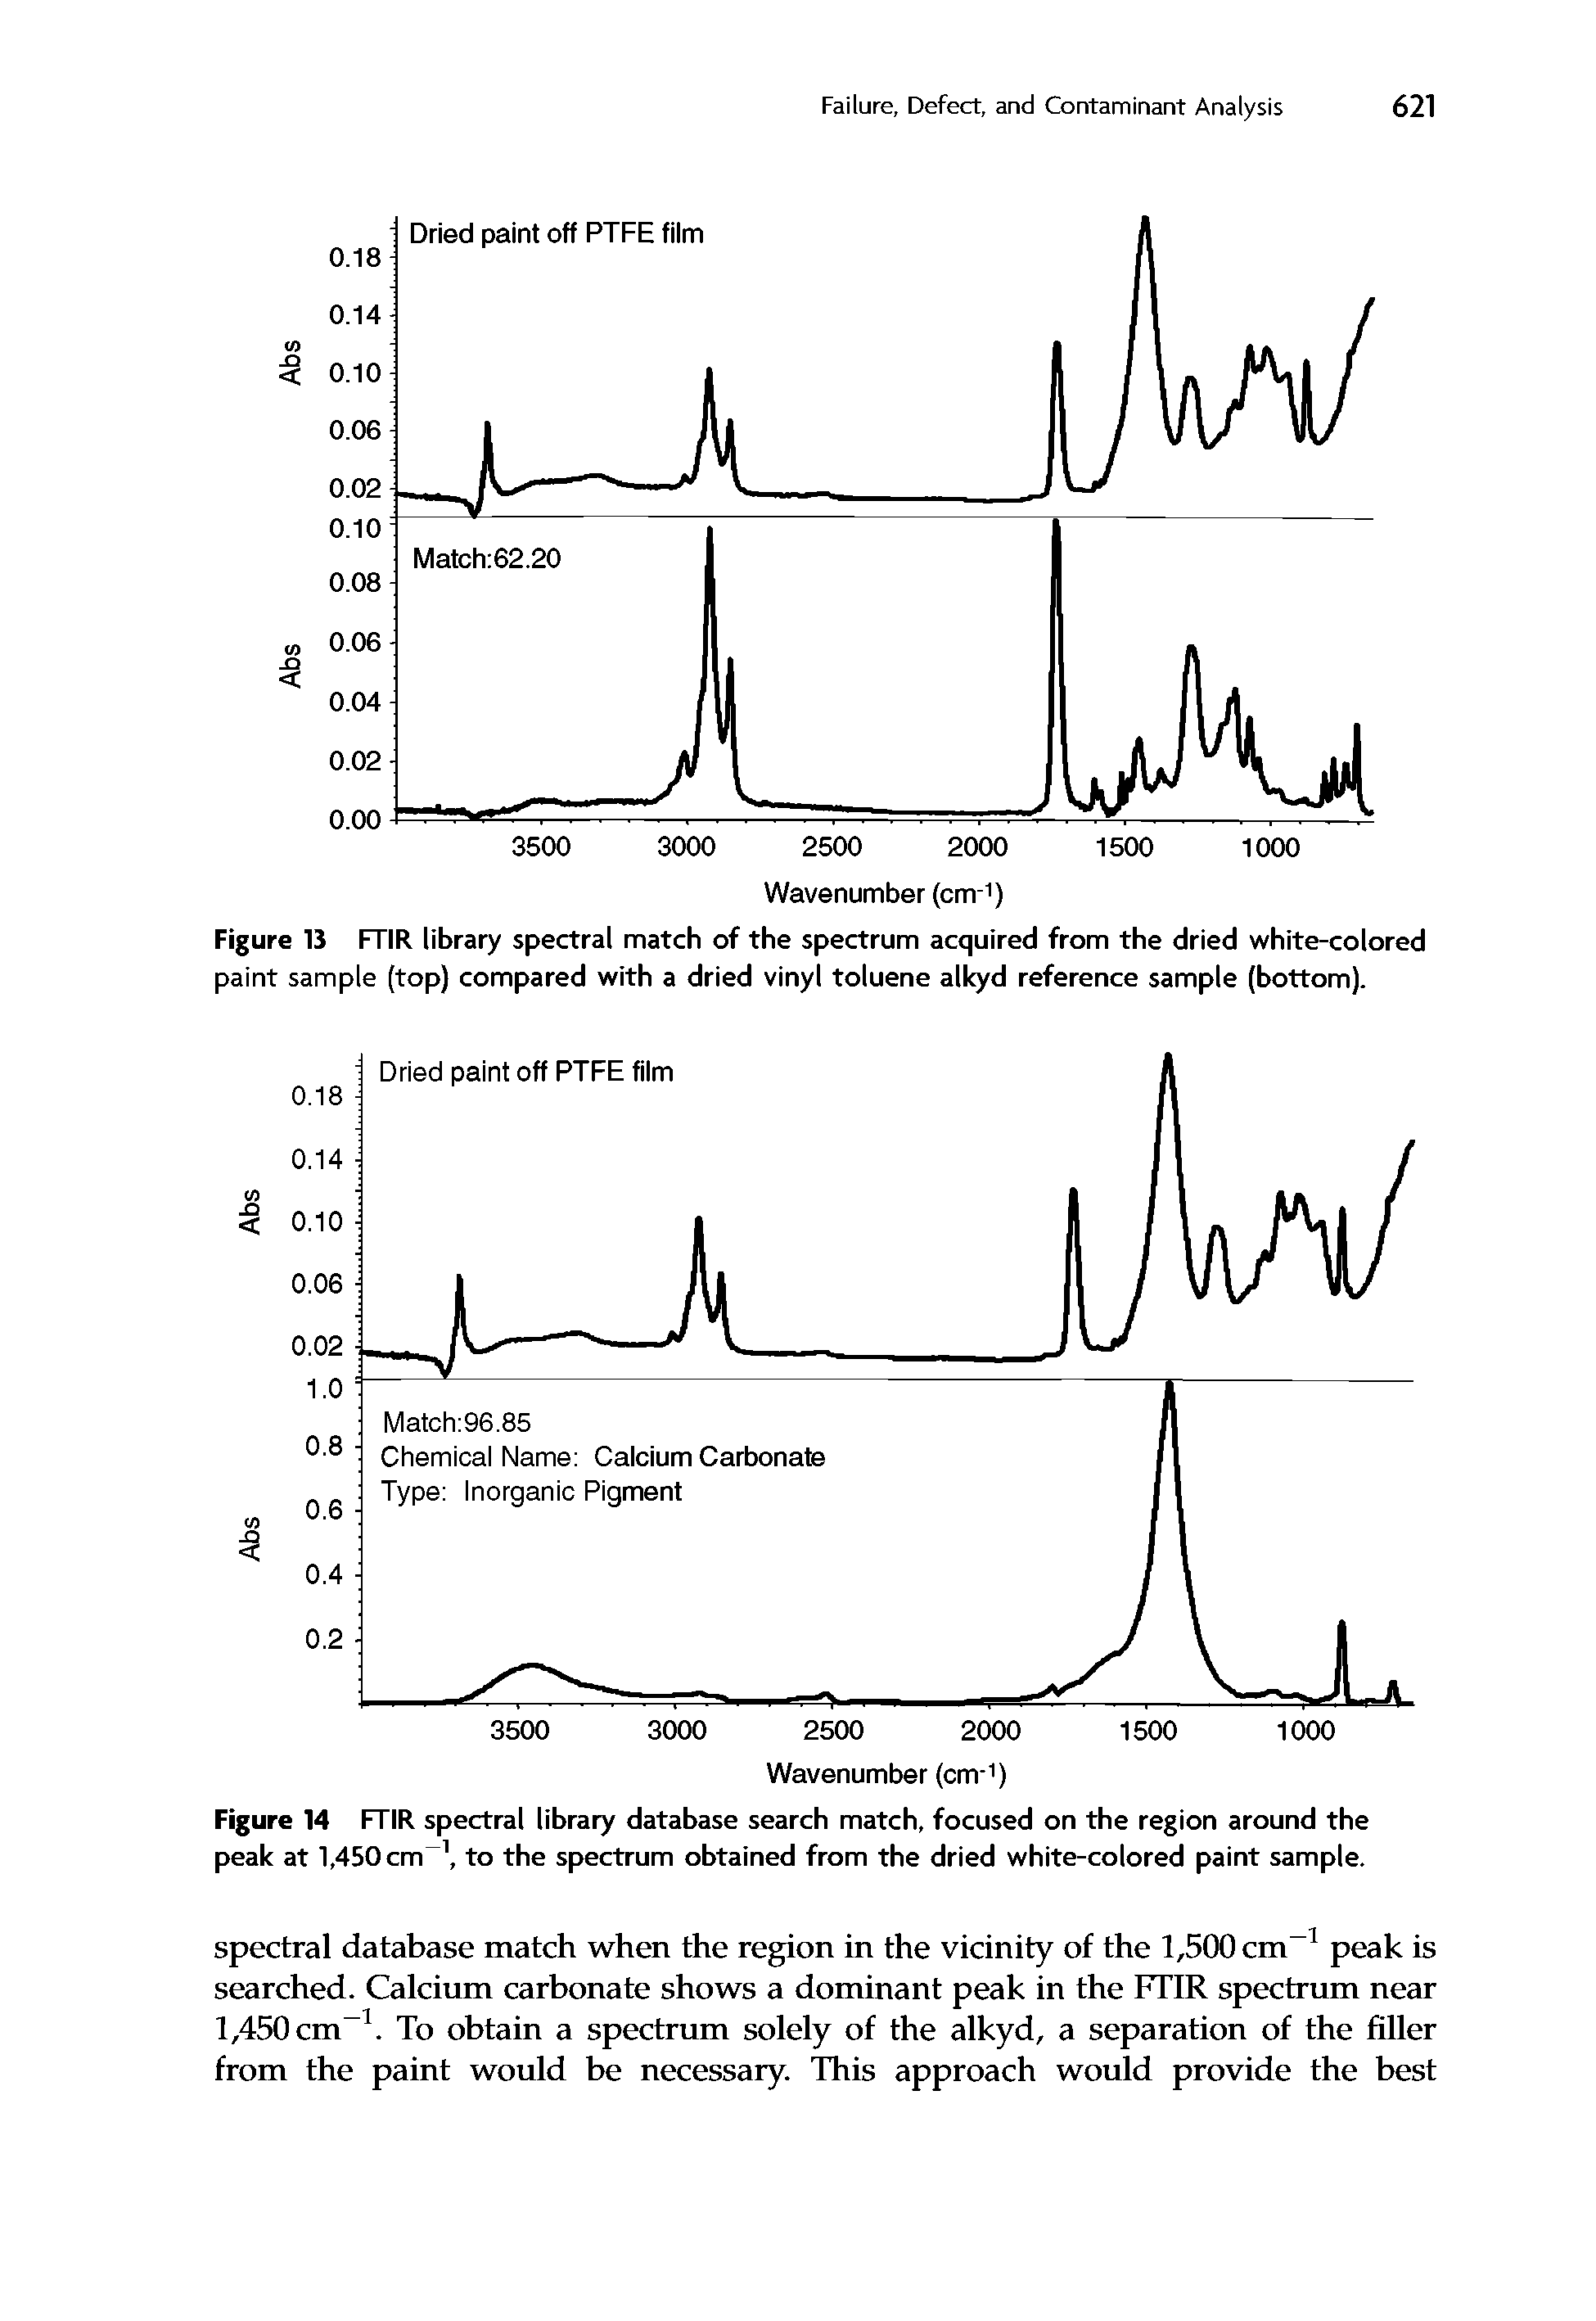 Figure 13 FTIR library spectral match of the spectrum acquired from the dried white-colored paint sample (top) compared with a dried vinyl toluene alkyd reference sample (bottom).